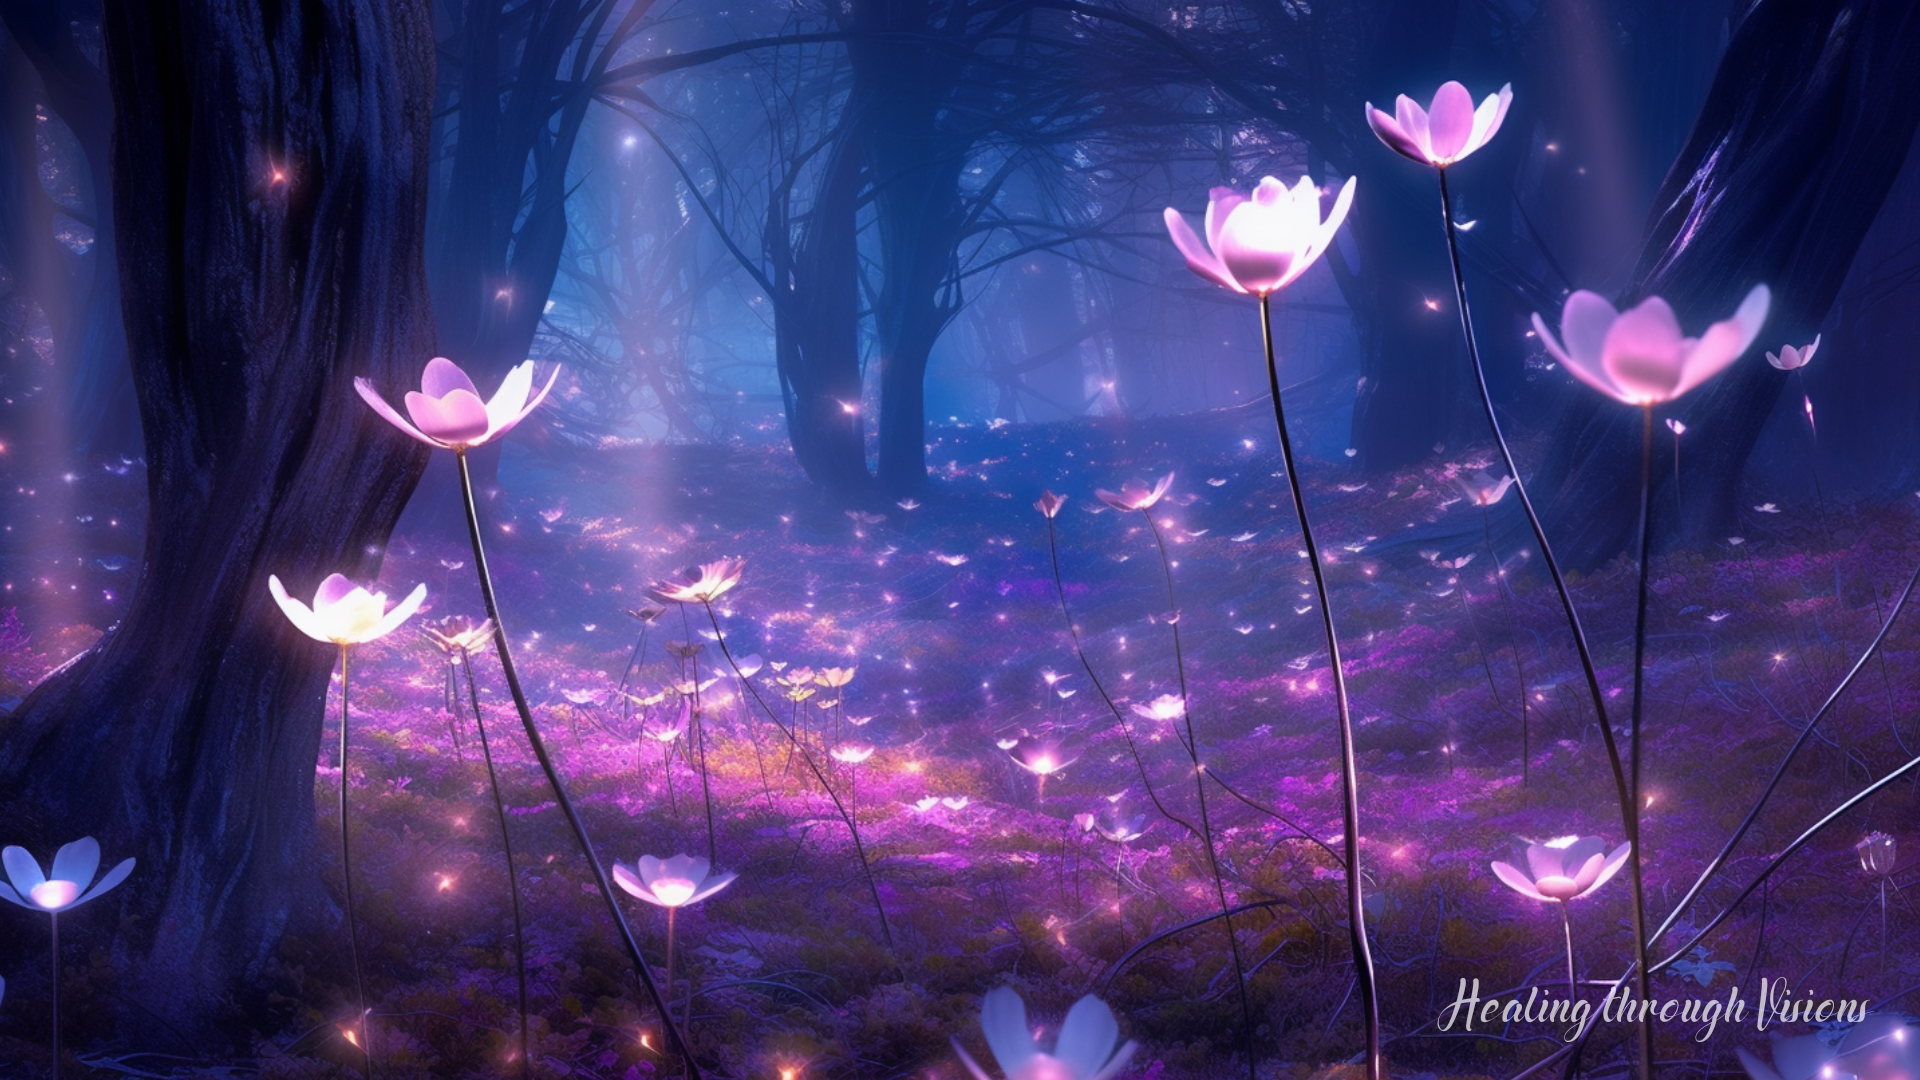 The scene unfolds before our eyes, a realm where magic and beauty intertwine. A meadow bursts to life with an awe-inspiring display of blossoming purple flowers, their petals glistening with an ethereal glow. Each delicate bloom radiates a vivid vibrancy, as if infused with the essence of stardust and dreams. The air hums with a gentle energy, as whispers of enchantment caress the senses. Sparkling dewdrops adorn the petals, reflecting the soft rays of a golden sun. As we immerse ourselves in this captivating vision, we can almost feel the palpable magic, a loving energy that weaves through the air, embracing all who gaze upon its magnificence. It is a sight that stirs the heart and ignites the imagination, inviting us to believe in the extraordinary and embrace the infinite possibilities that lie within our grasp.